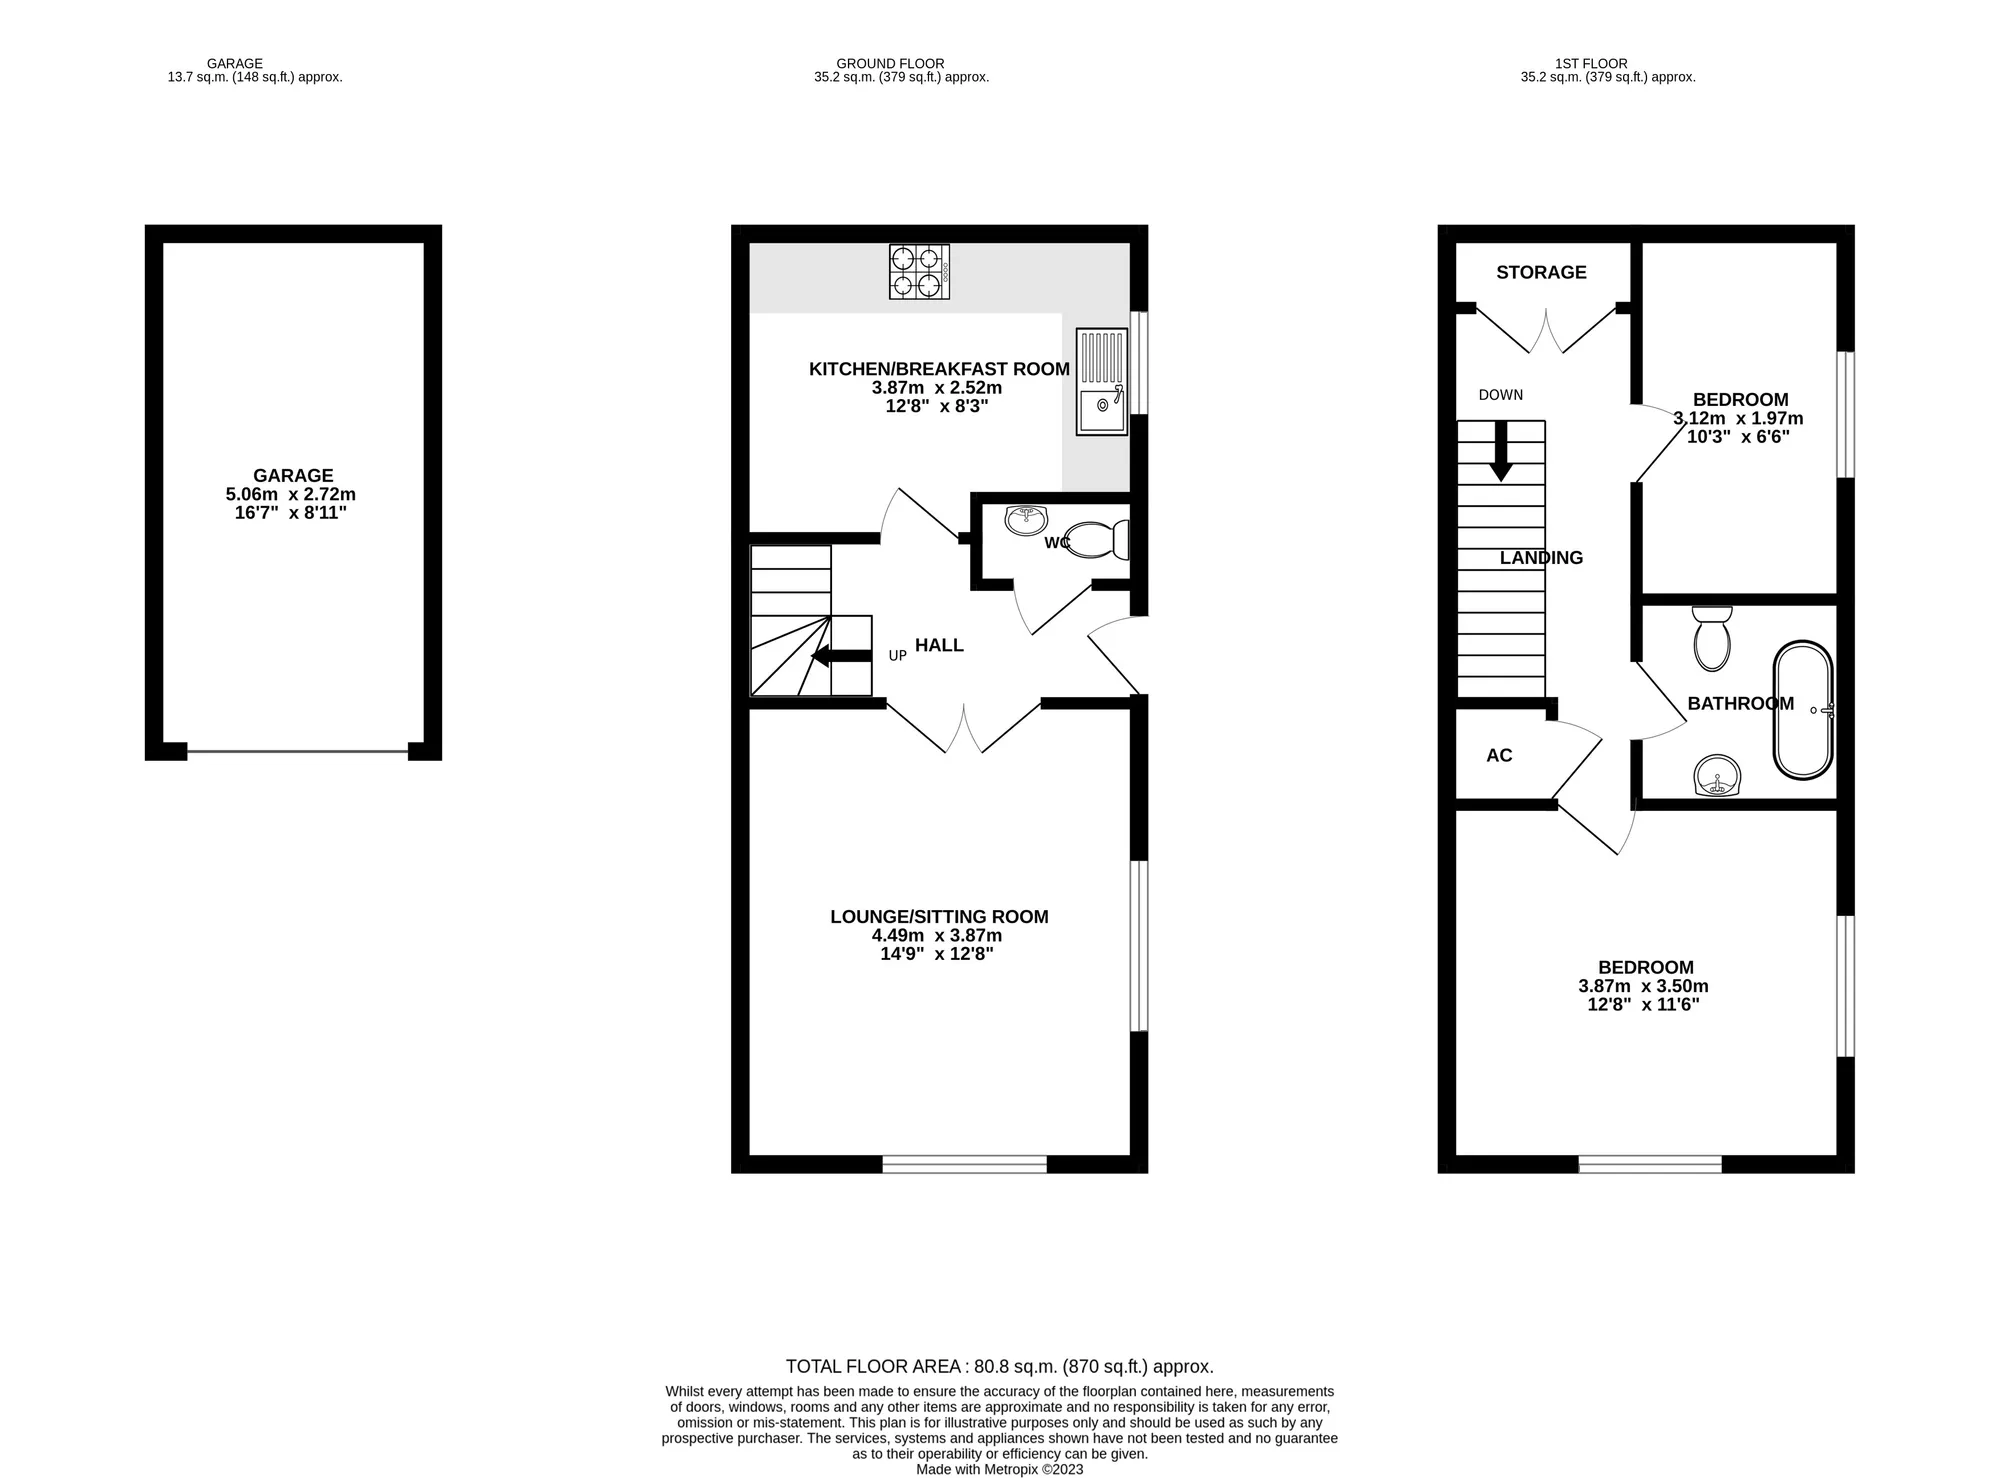 2 bed ground floor flat for sale in Milton Road, Bournemouth - Property floorplan